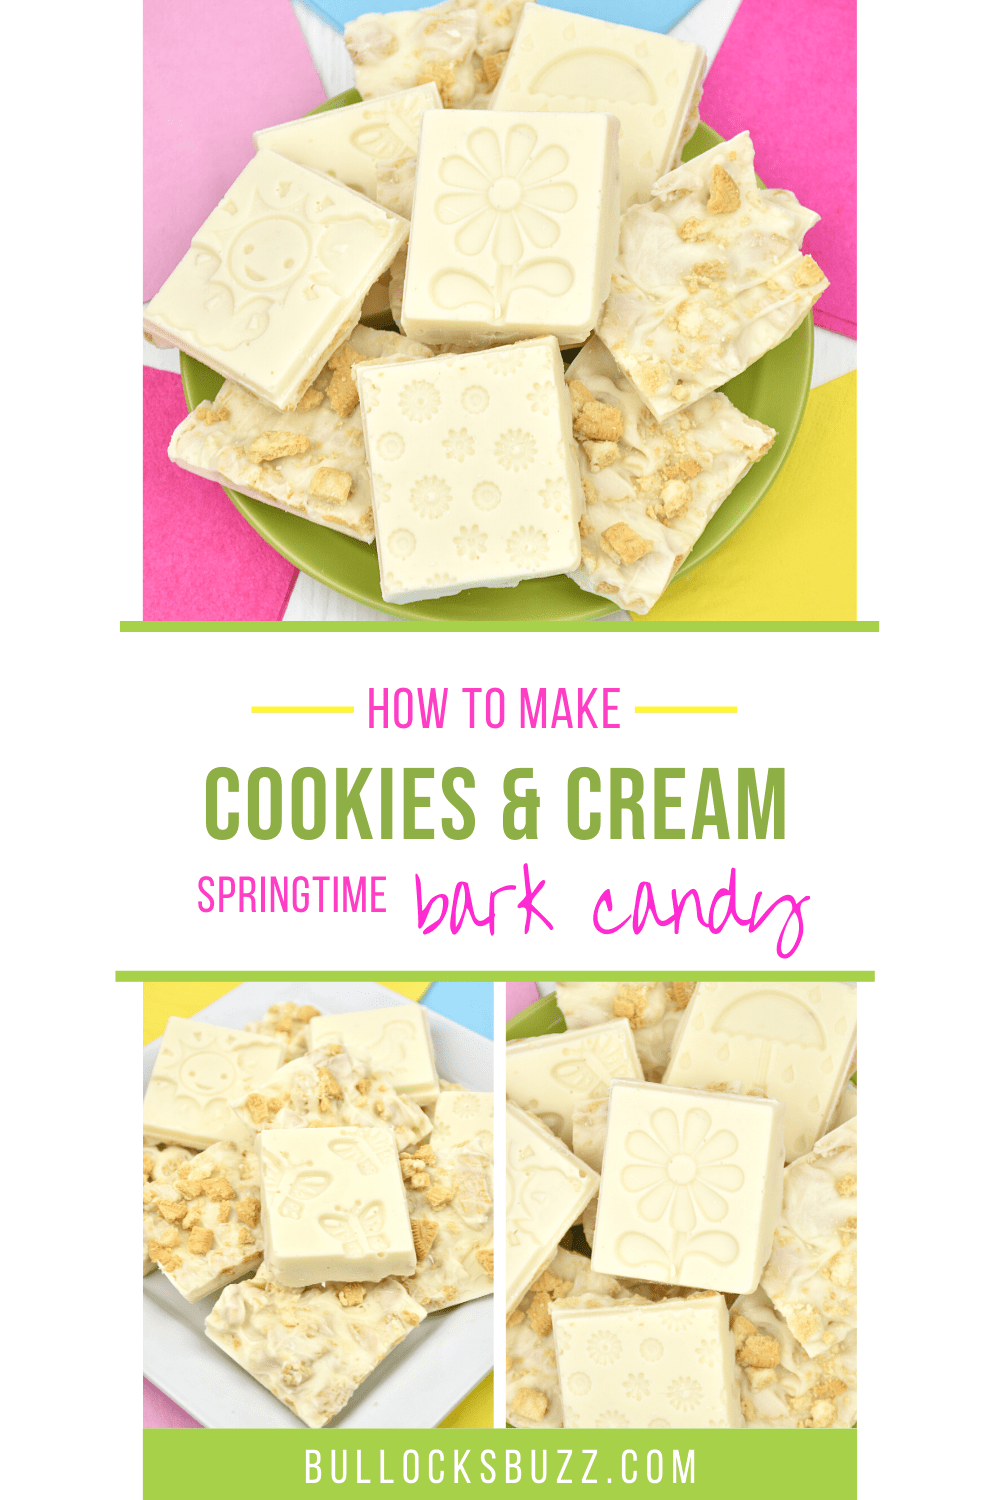 Chunks of everyone's favorite cookie are drenched in rich, creamy white chocolate in this melt-in-your-mouth dessert with an extra crunch! But what really makes this recipe stand out are the cute little springtime designs that are on one side of the finished bark!